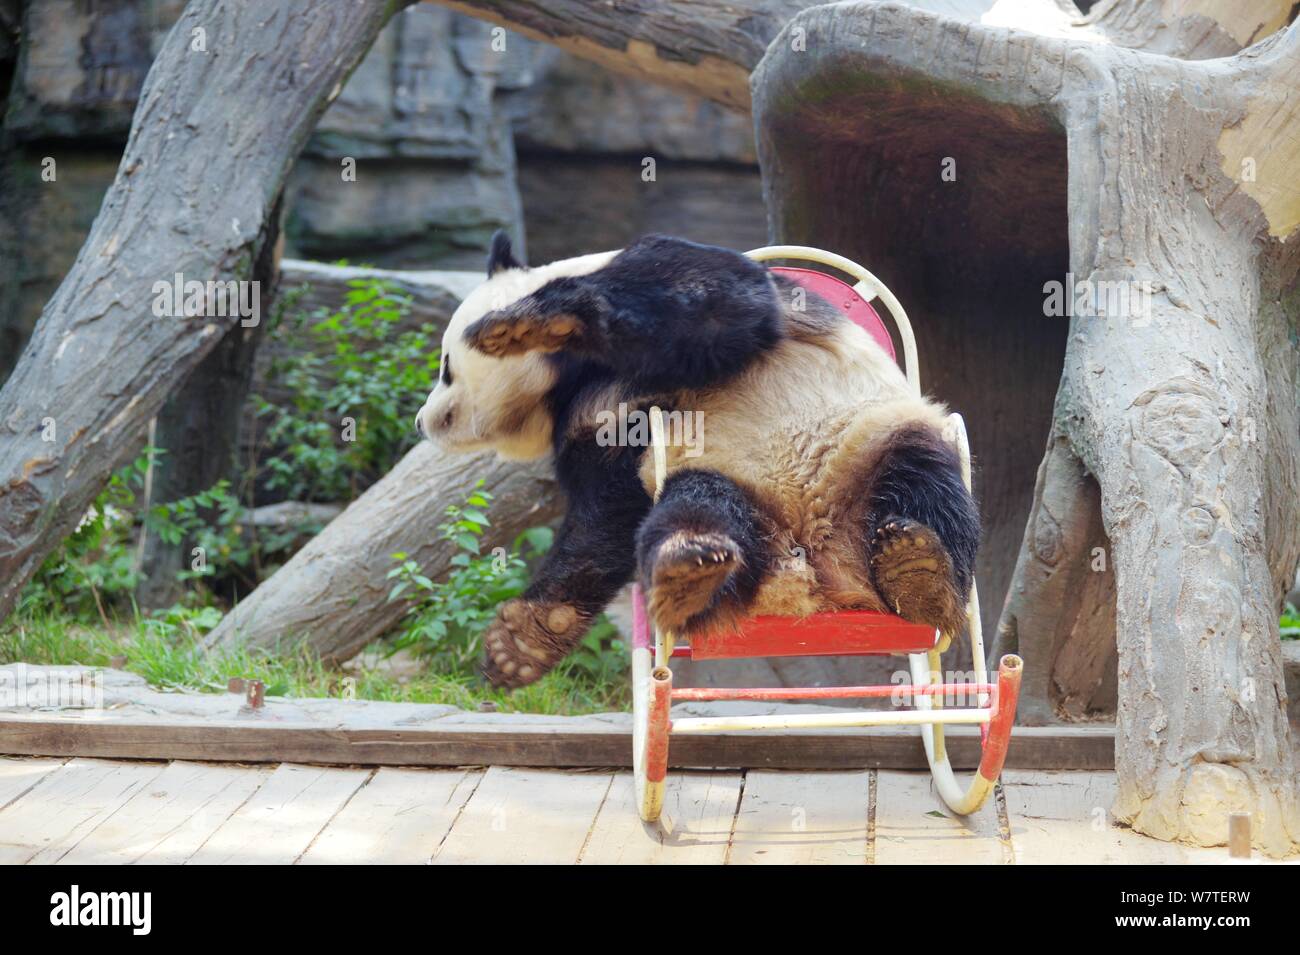 A giant panda plays on a rocking chair at Beijing Zoo in Beijing, China, 17 May 2017. Stock Photo